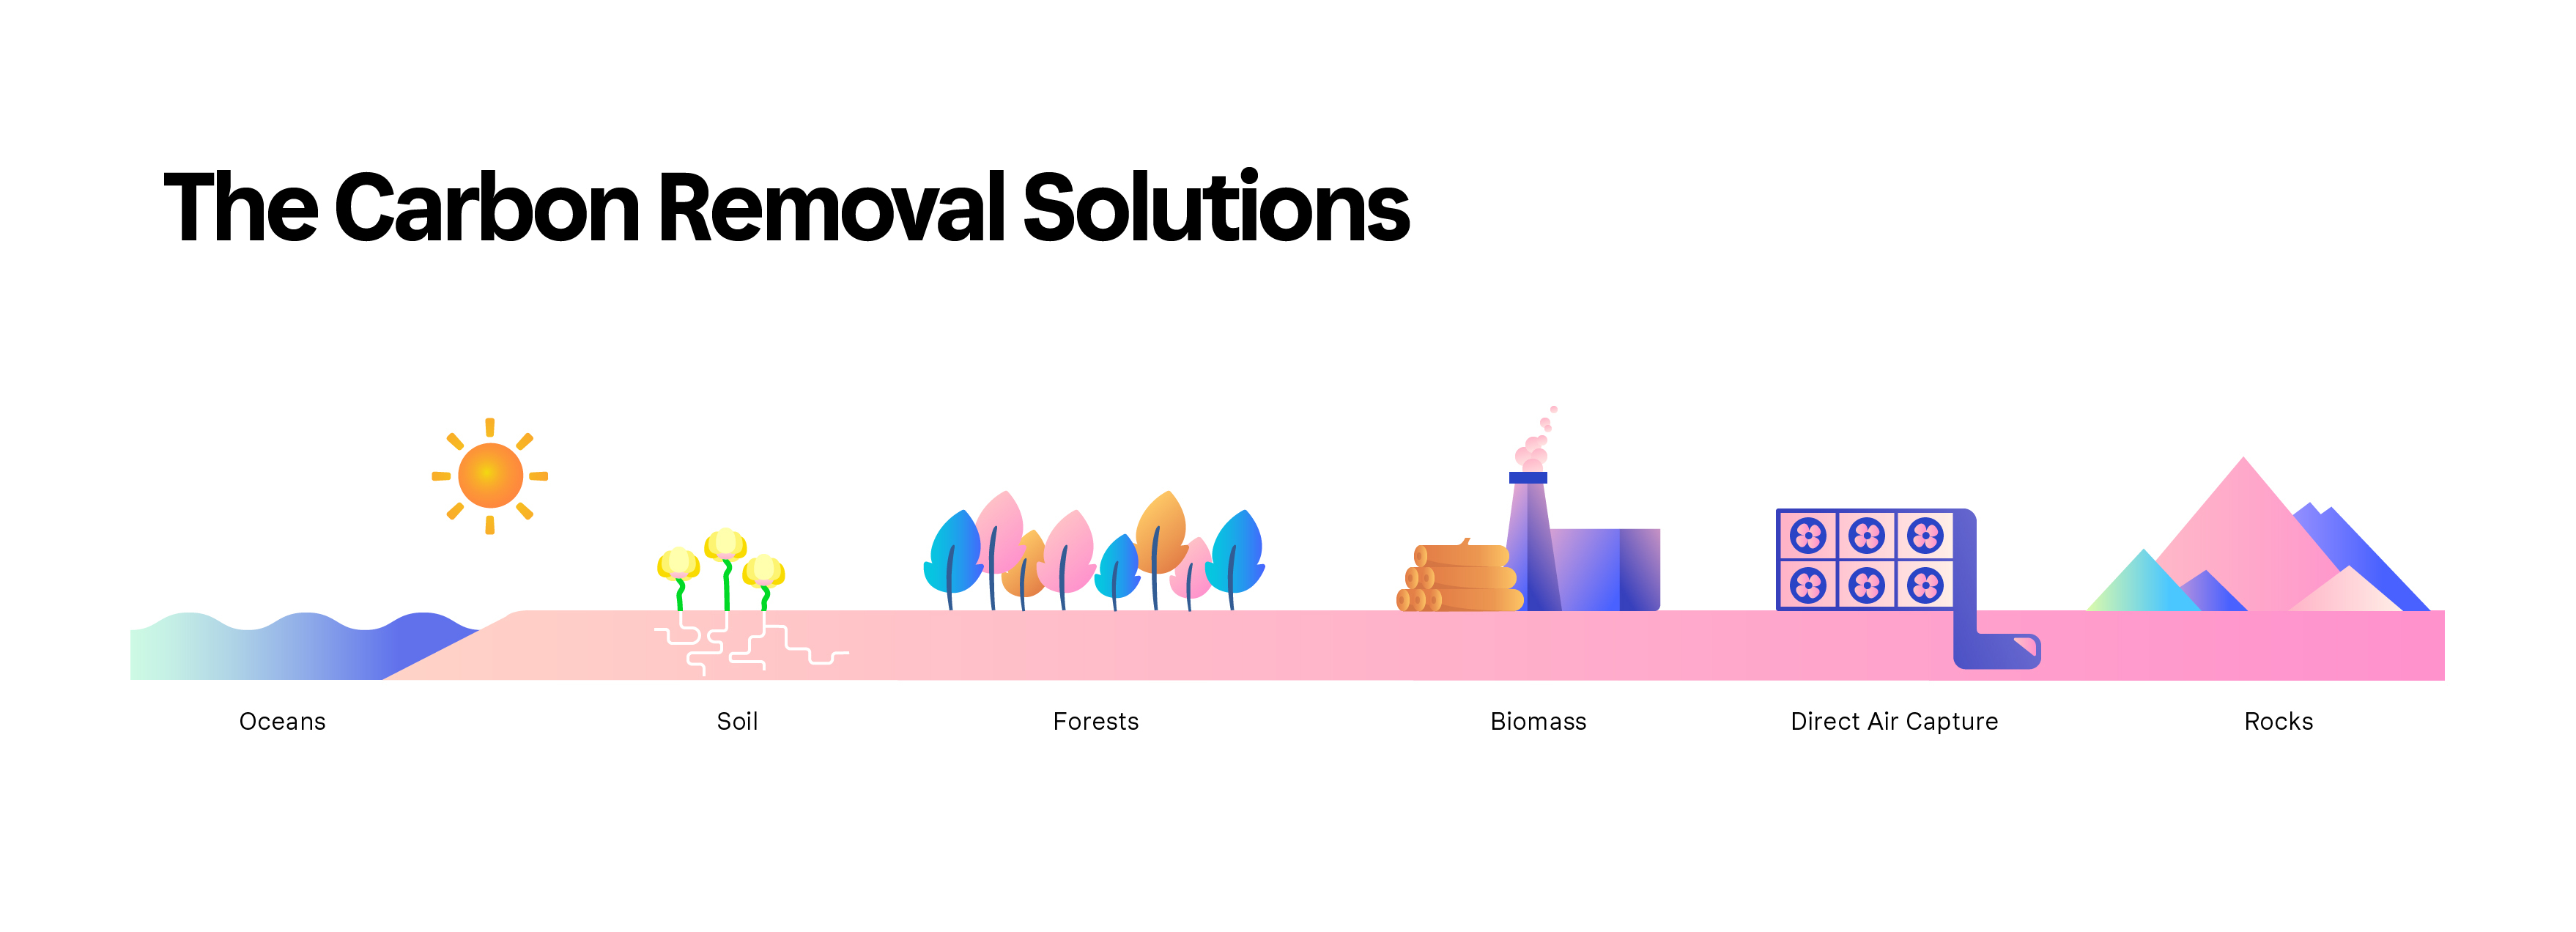 Carbon-Removal-Ecosystem-Infographic-Pink 1